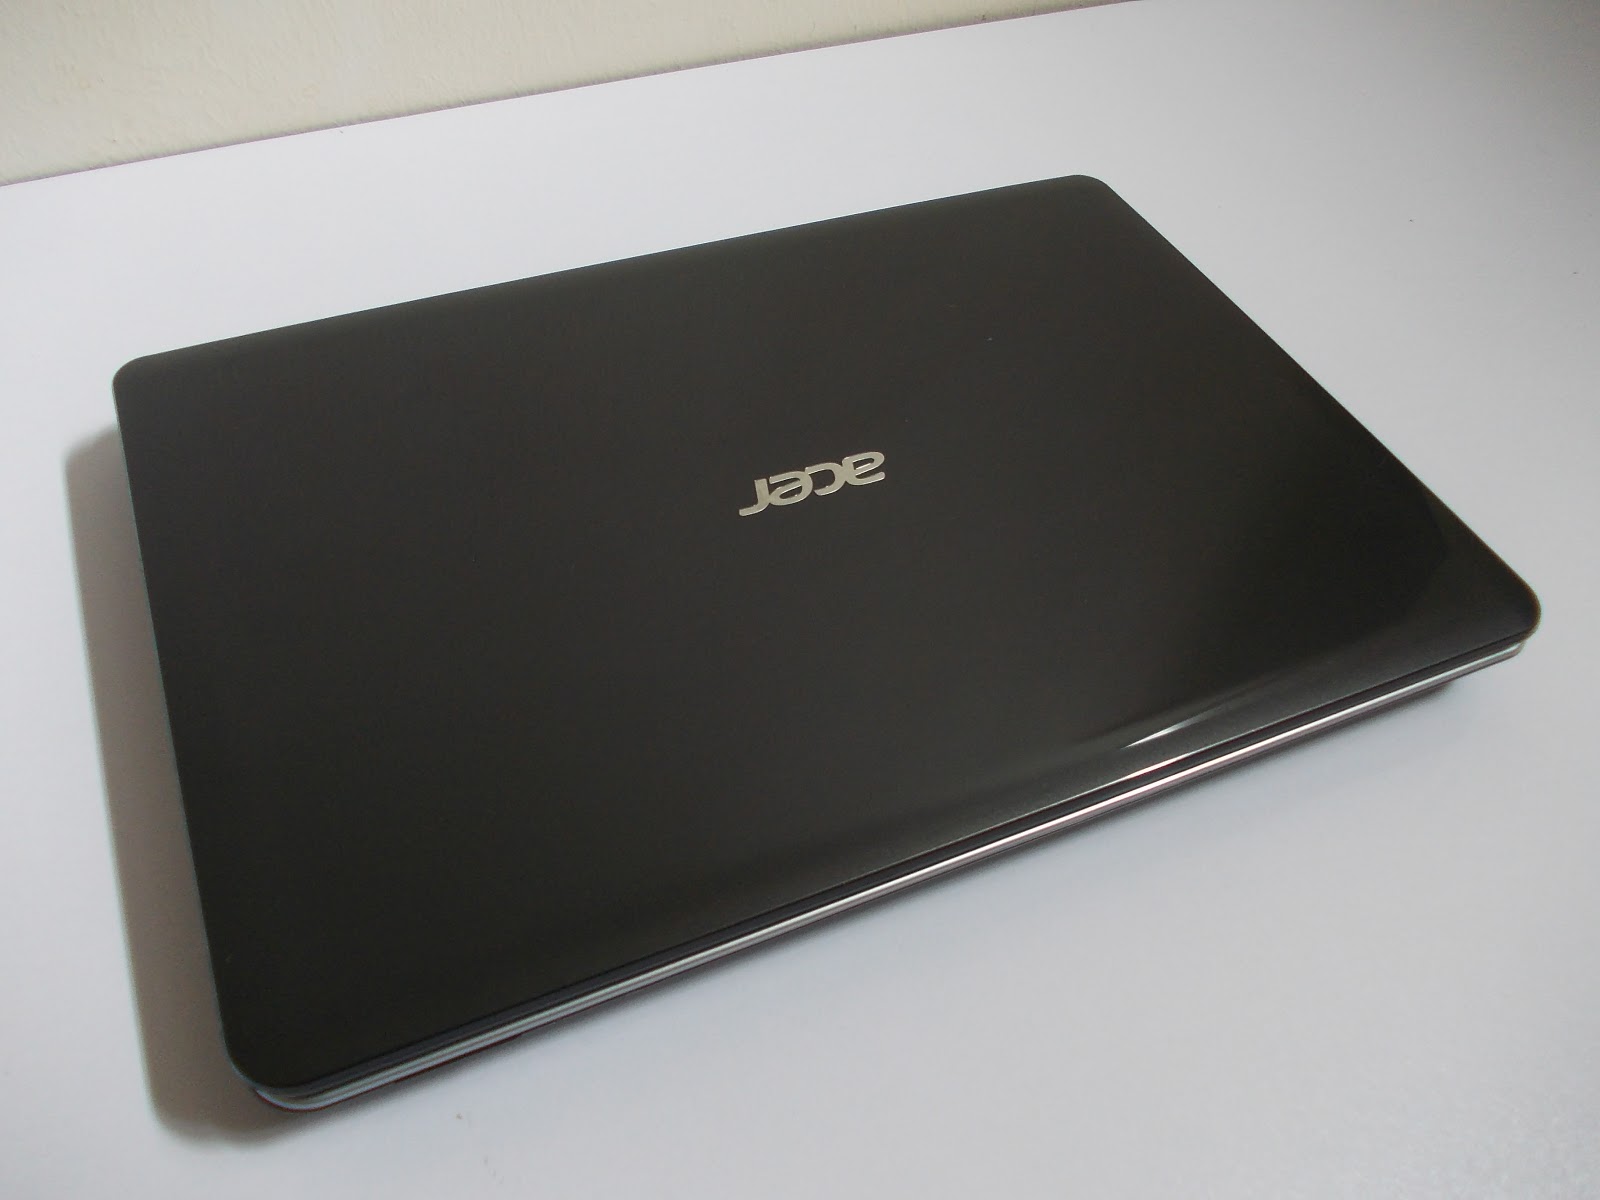 Three A Tech Computer Sales and Services: Used Laptop Acer Aspire E1